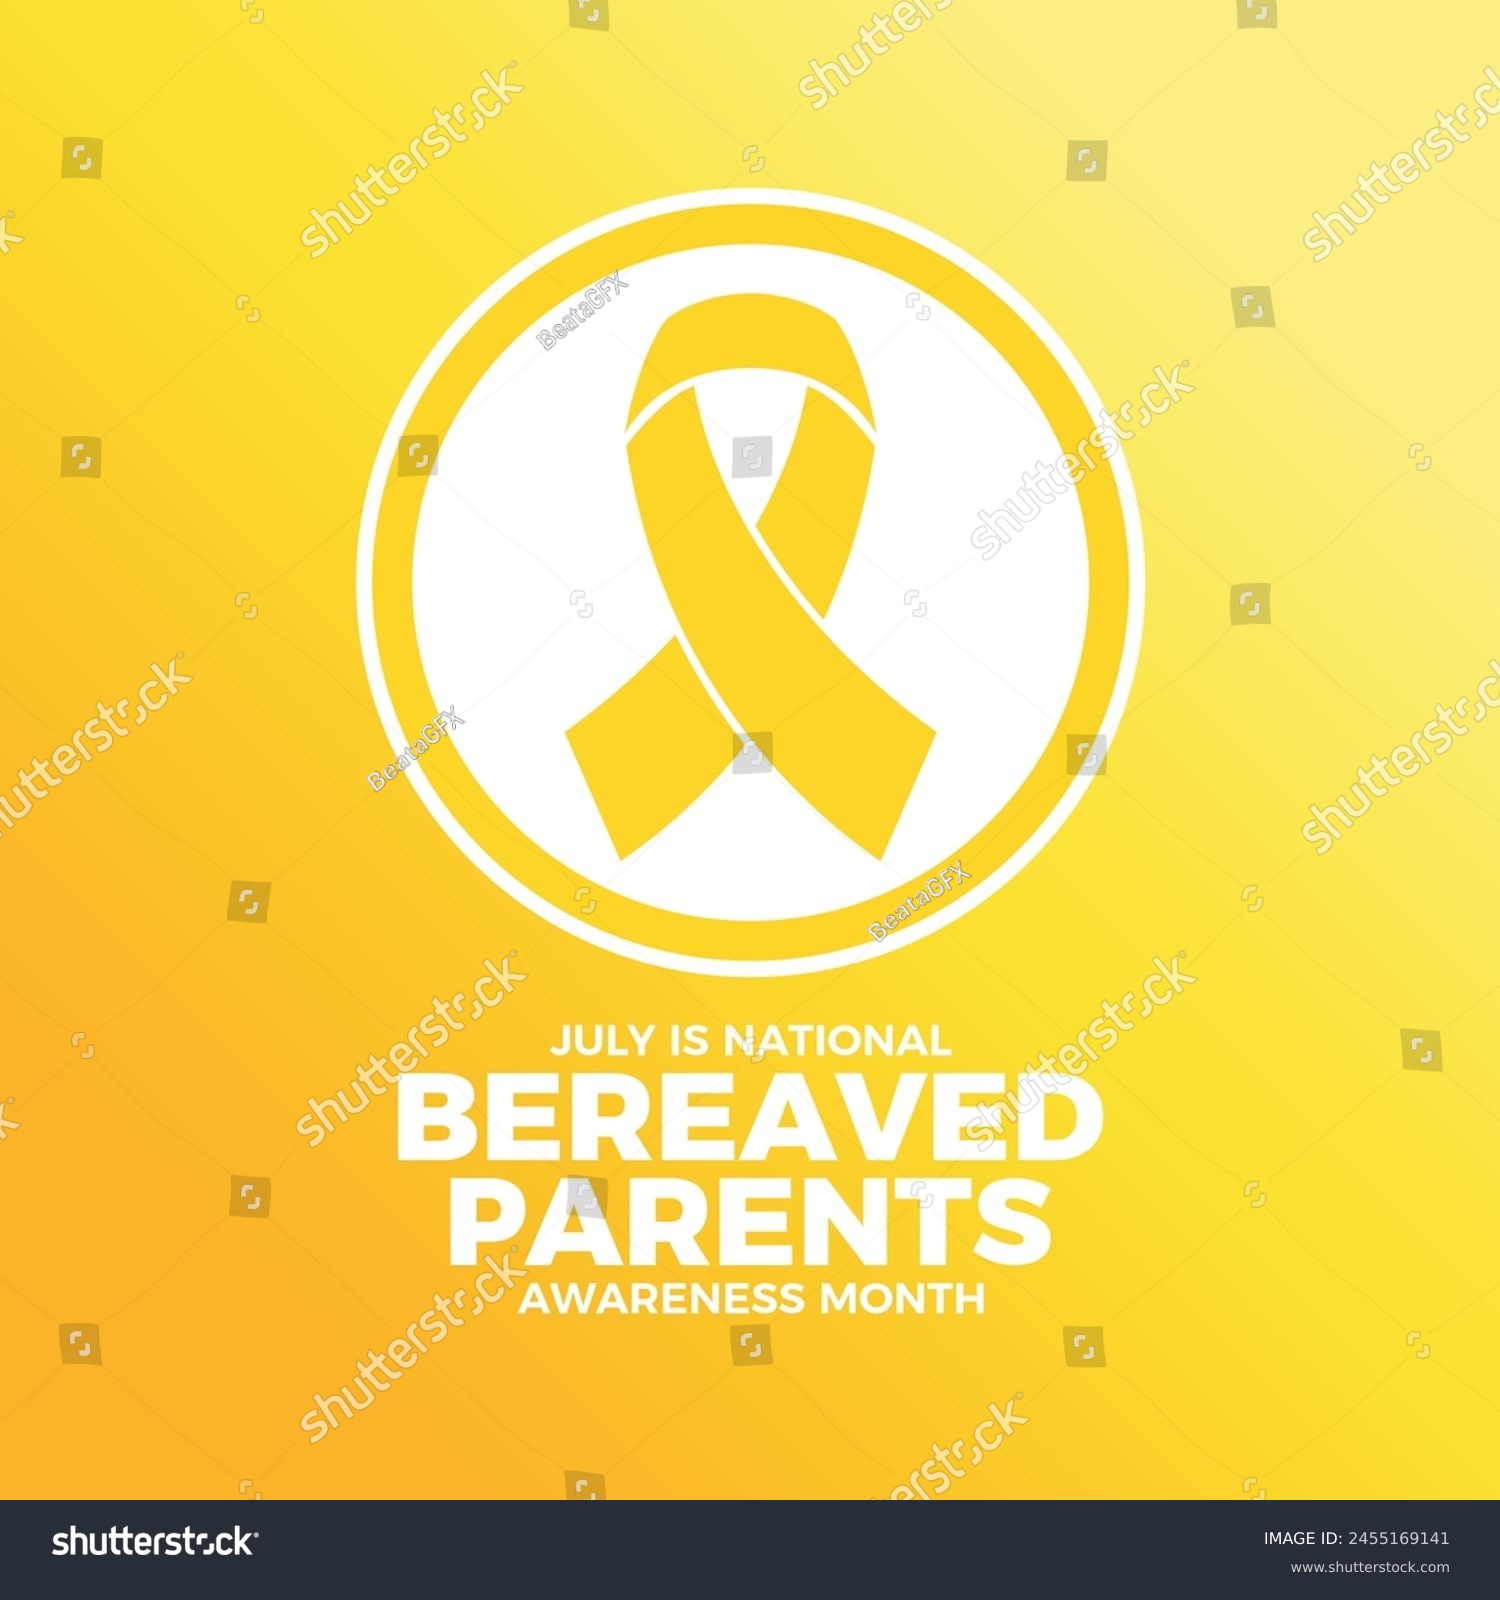 SVG of July is National Bereaved Parents Awareness Month poster vector illustration. Yellow awareness ribbon icon in a circle. Template for background, banner, card. Important day svg